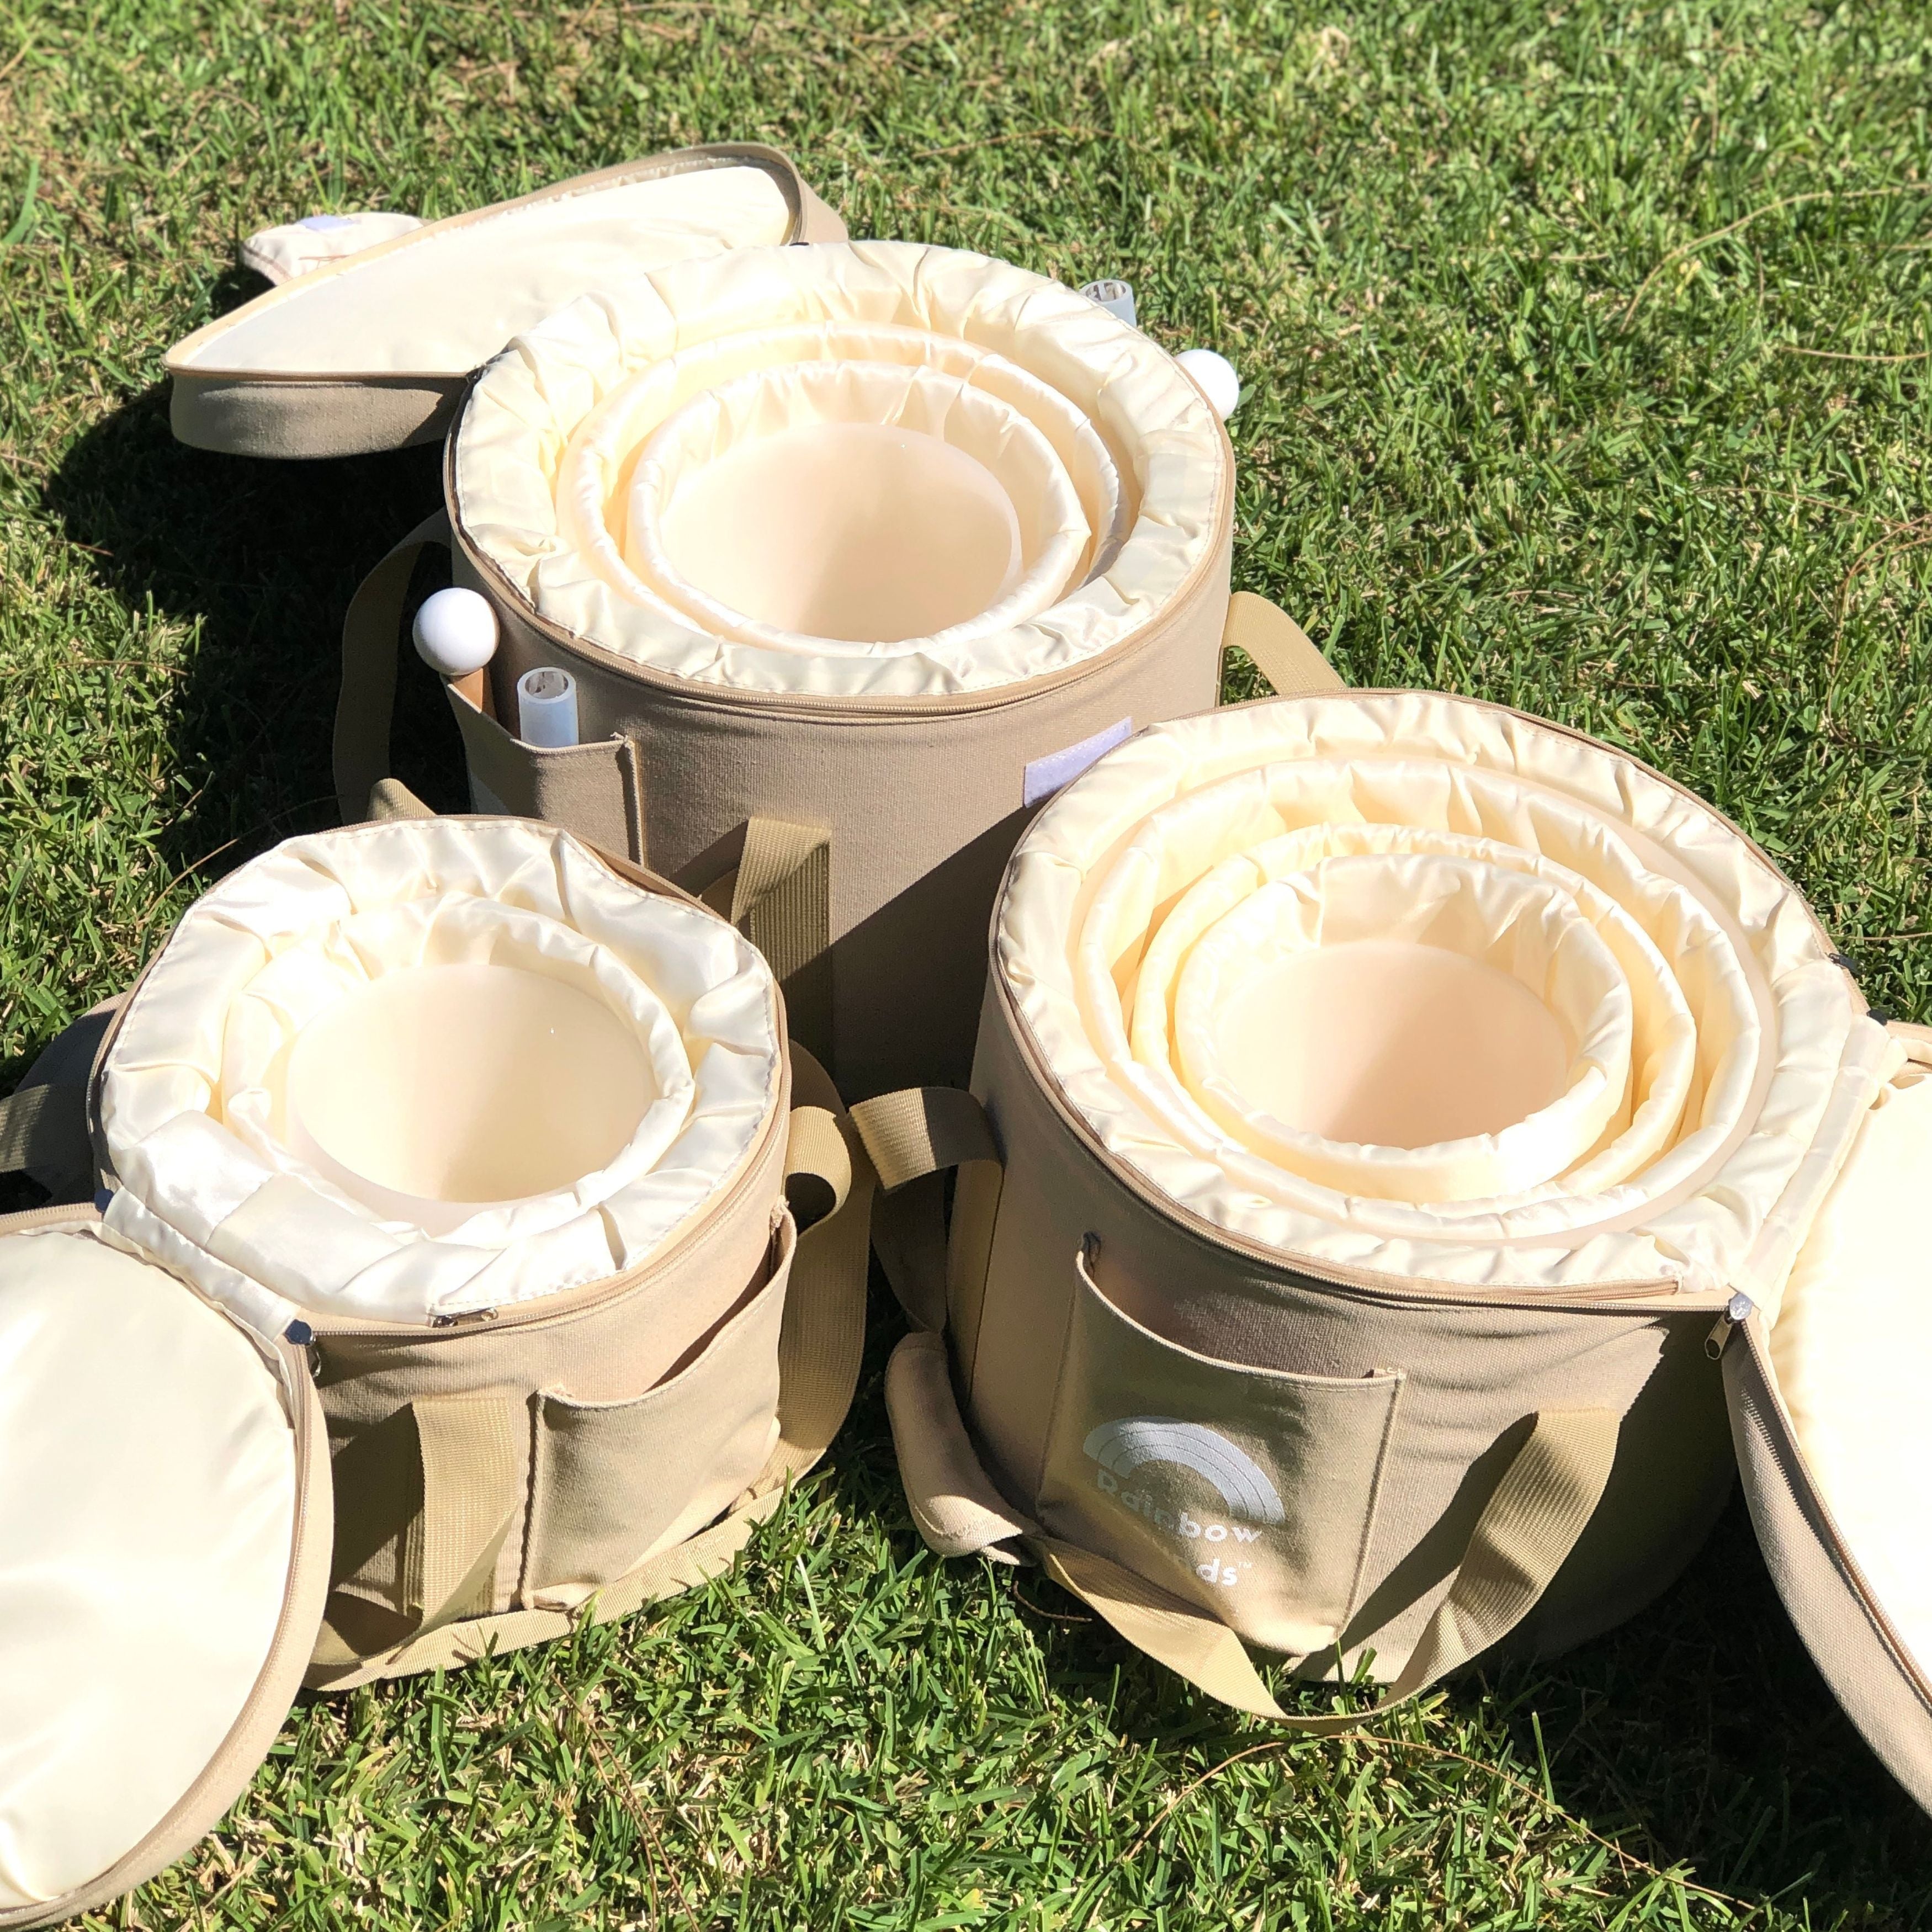 Full Octave︱Set of 8 White Crystal Singing Bowls in Beige Bags